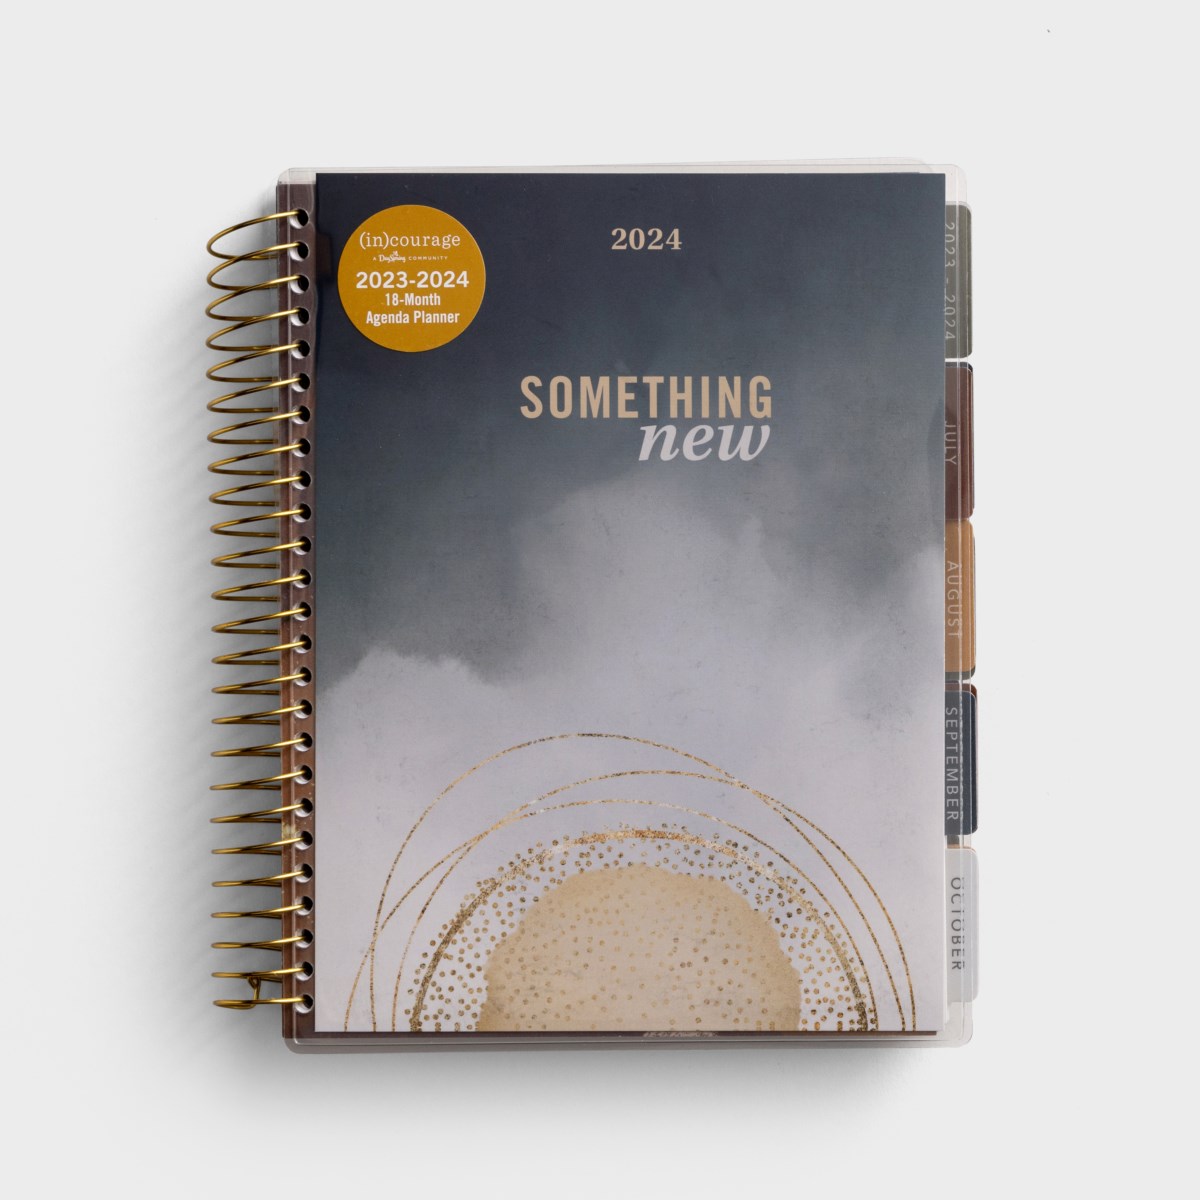 (in)courage - Something New - 2023-2024 18-Month Agenda Planner